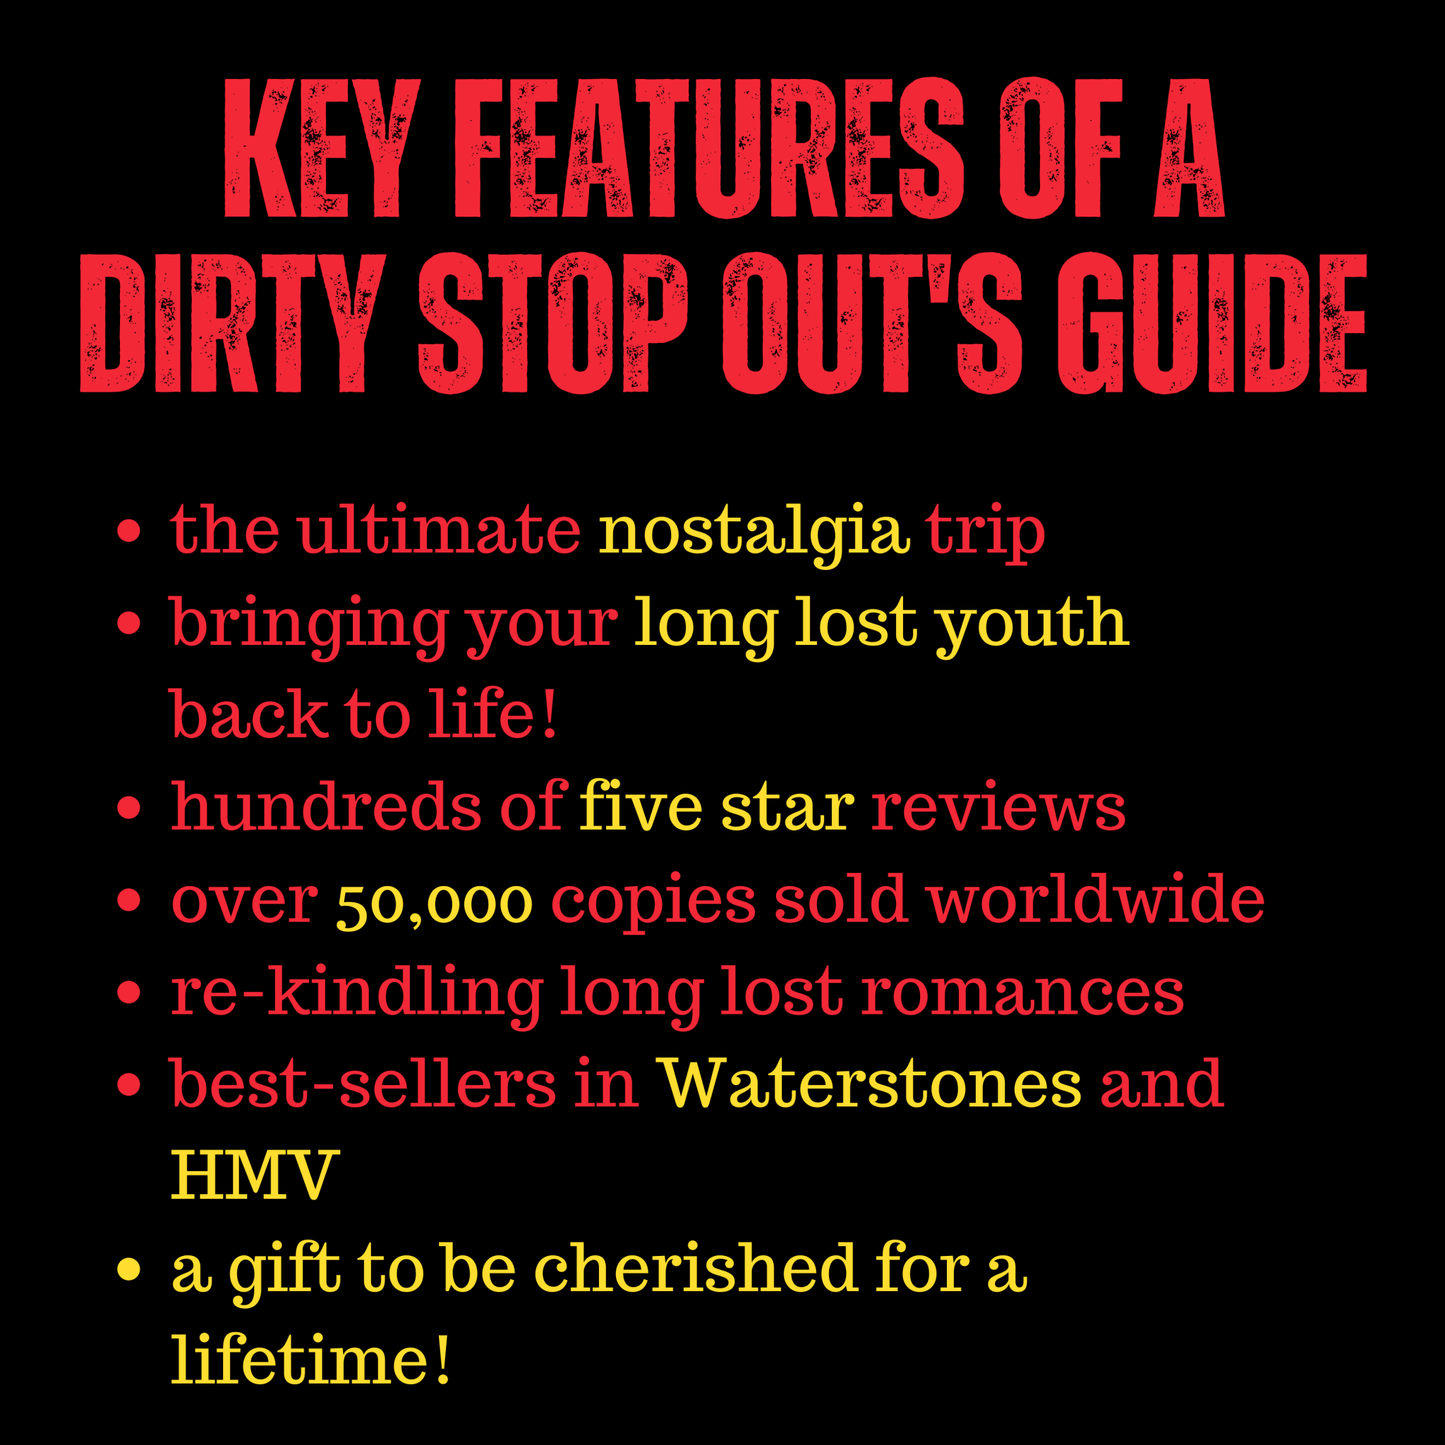 Dirty Stop Out's Guide to 1970s Birmingham - now back in stock! - Dirty Stop Outs